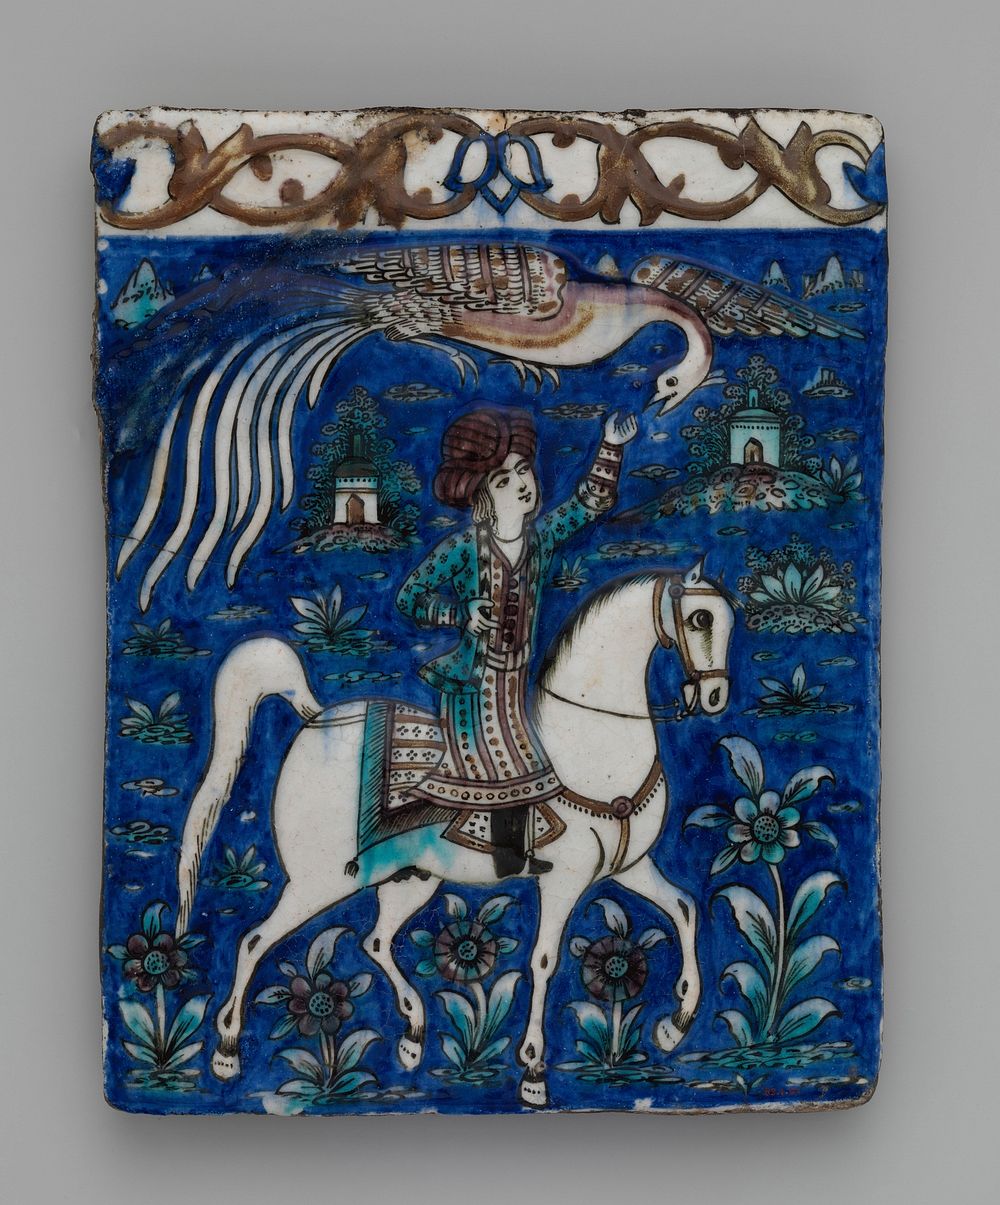 Tile with an Image of a Prince on Horseback, second half 19th century